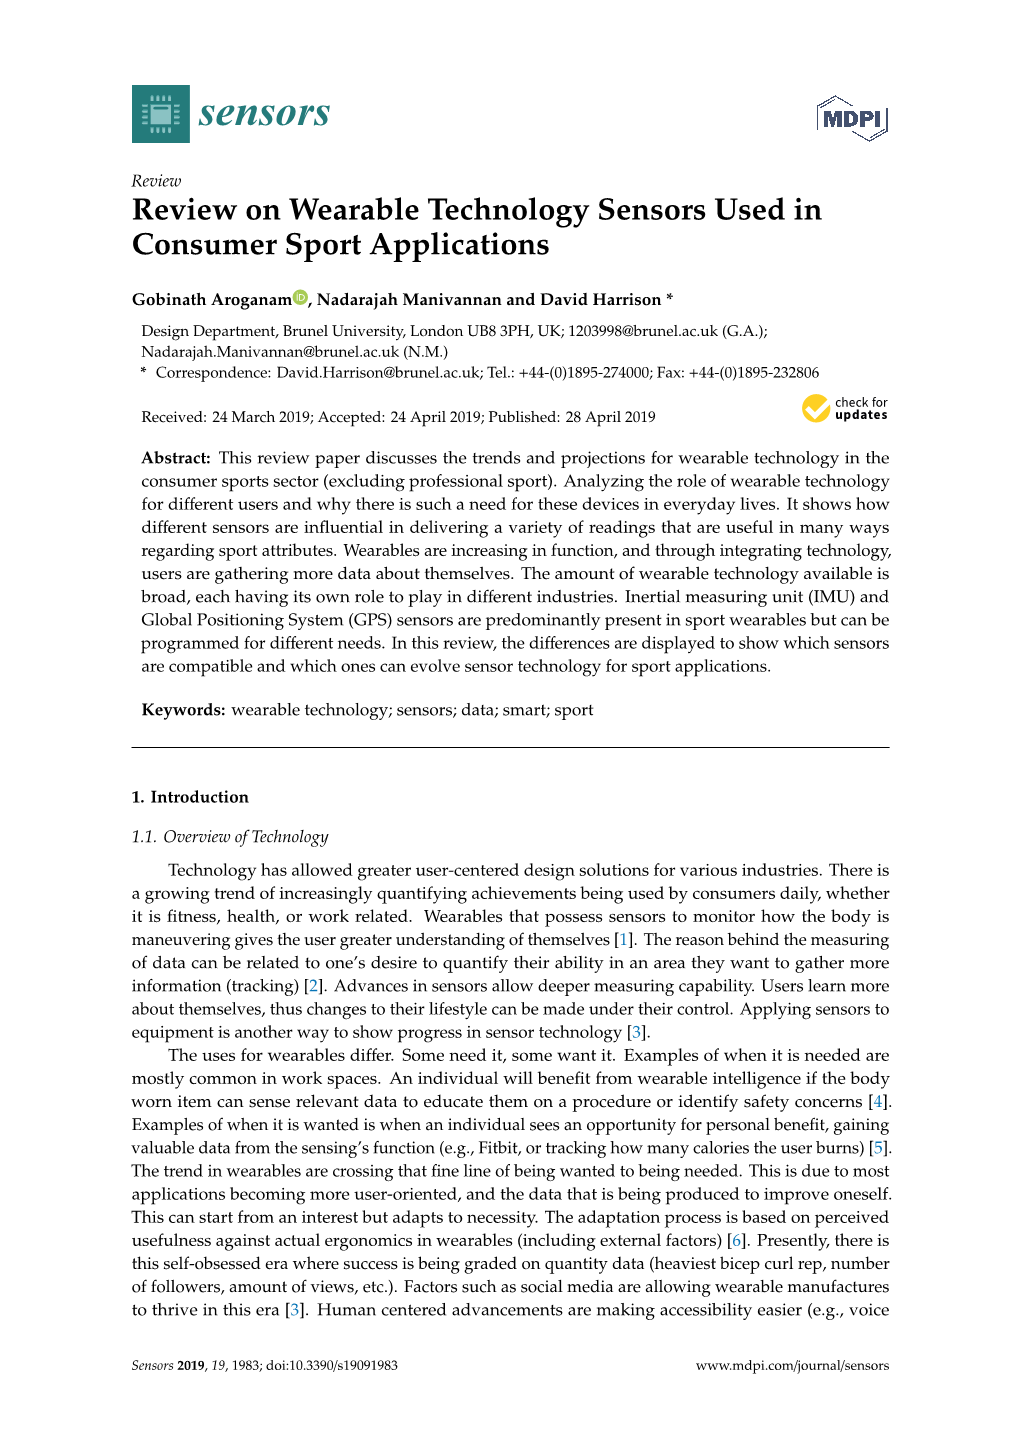 Review on Wearable Technology Sensors Used in Consumer Sport Applications